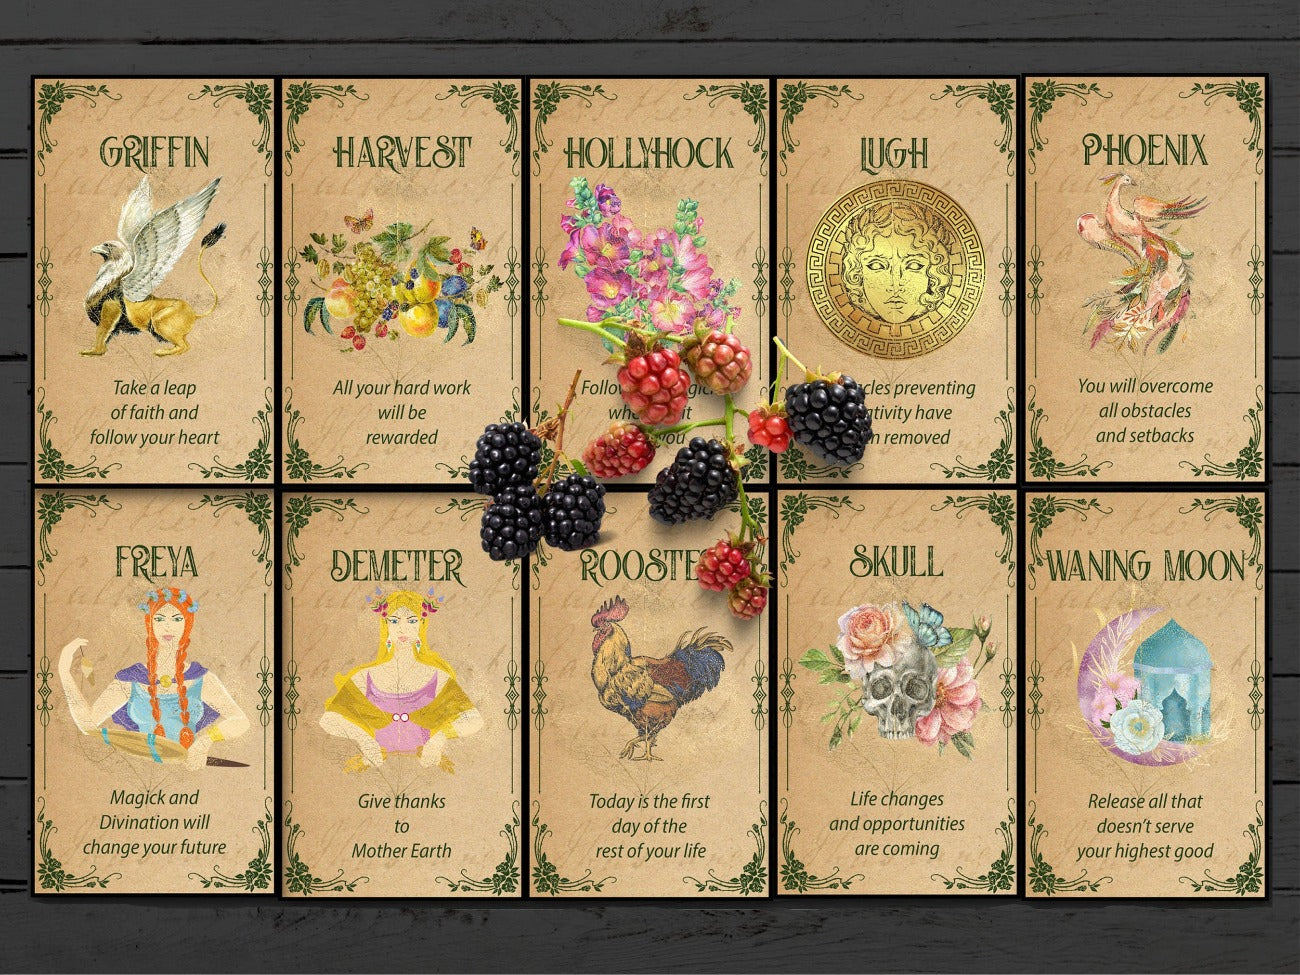 Image of 10 Oracle Cards, Griffin, Harvest, Hollyhock, Lugh, Phoenix, Freya, Demeter, Rooster, Skull, and Waning Moon.